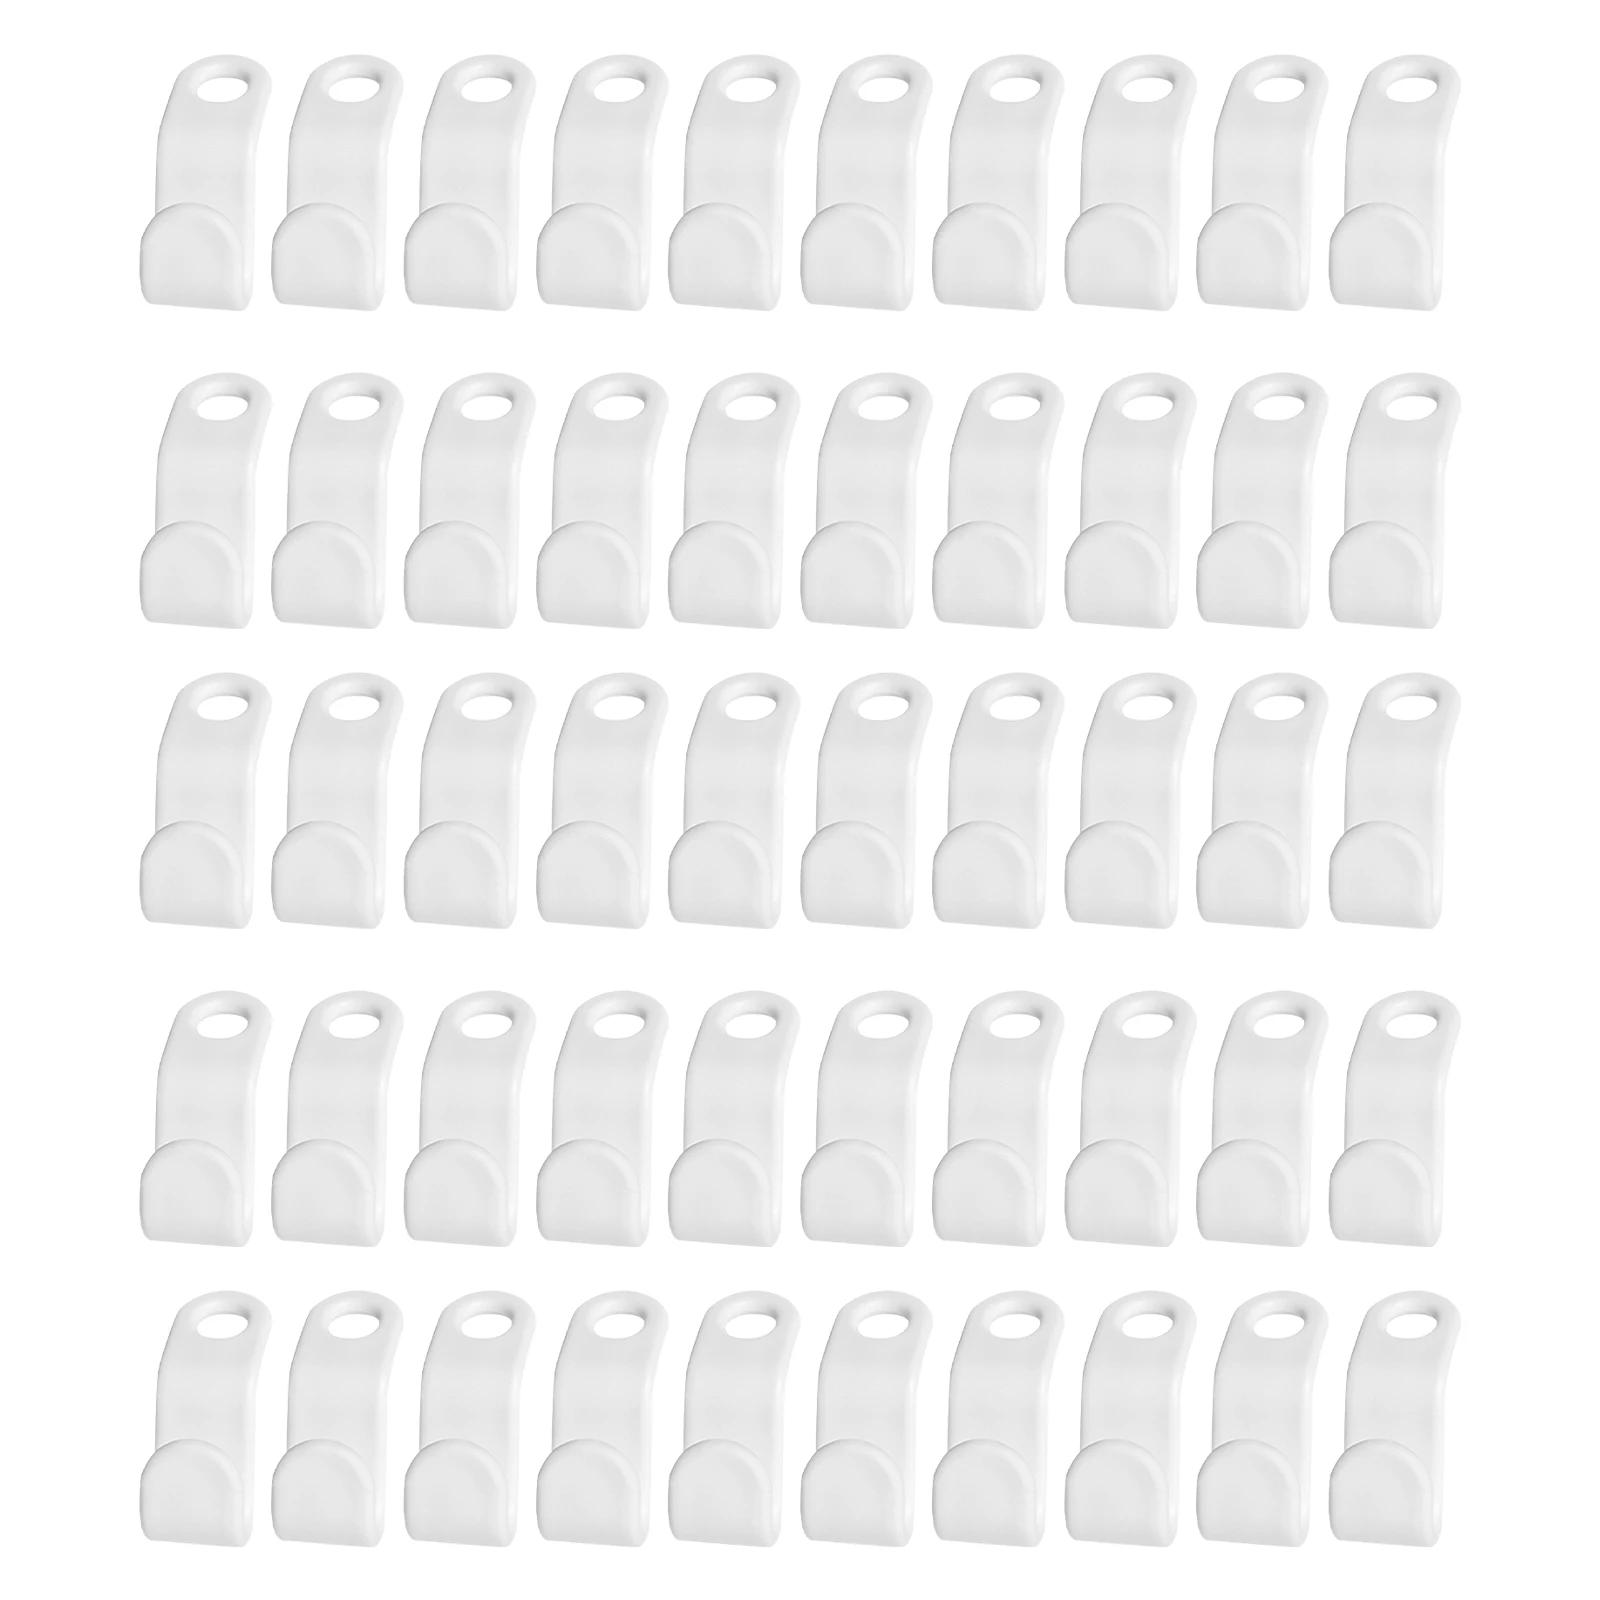 50pcs Space Saving Clothes Hanger Connector Hook PP Plastic For Closet Dormitory Coat Storage Home Heavy Duty Rack Holder Mini